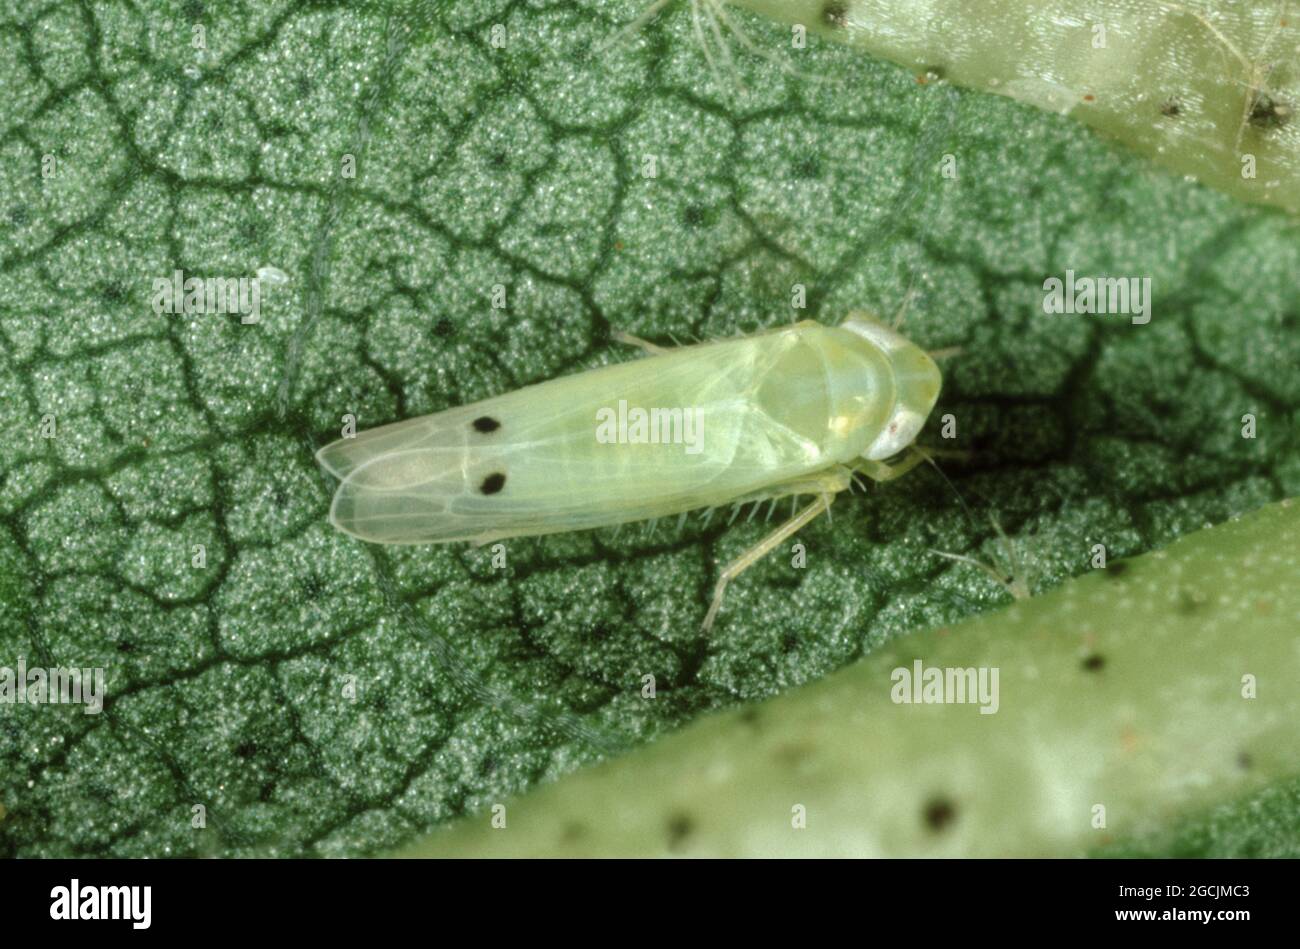 Photomicrograph of cotton leafhopper or jassid (Amrasca spp.) adult on cotton leaf, Thailand Stock Photo